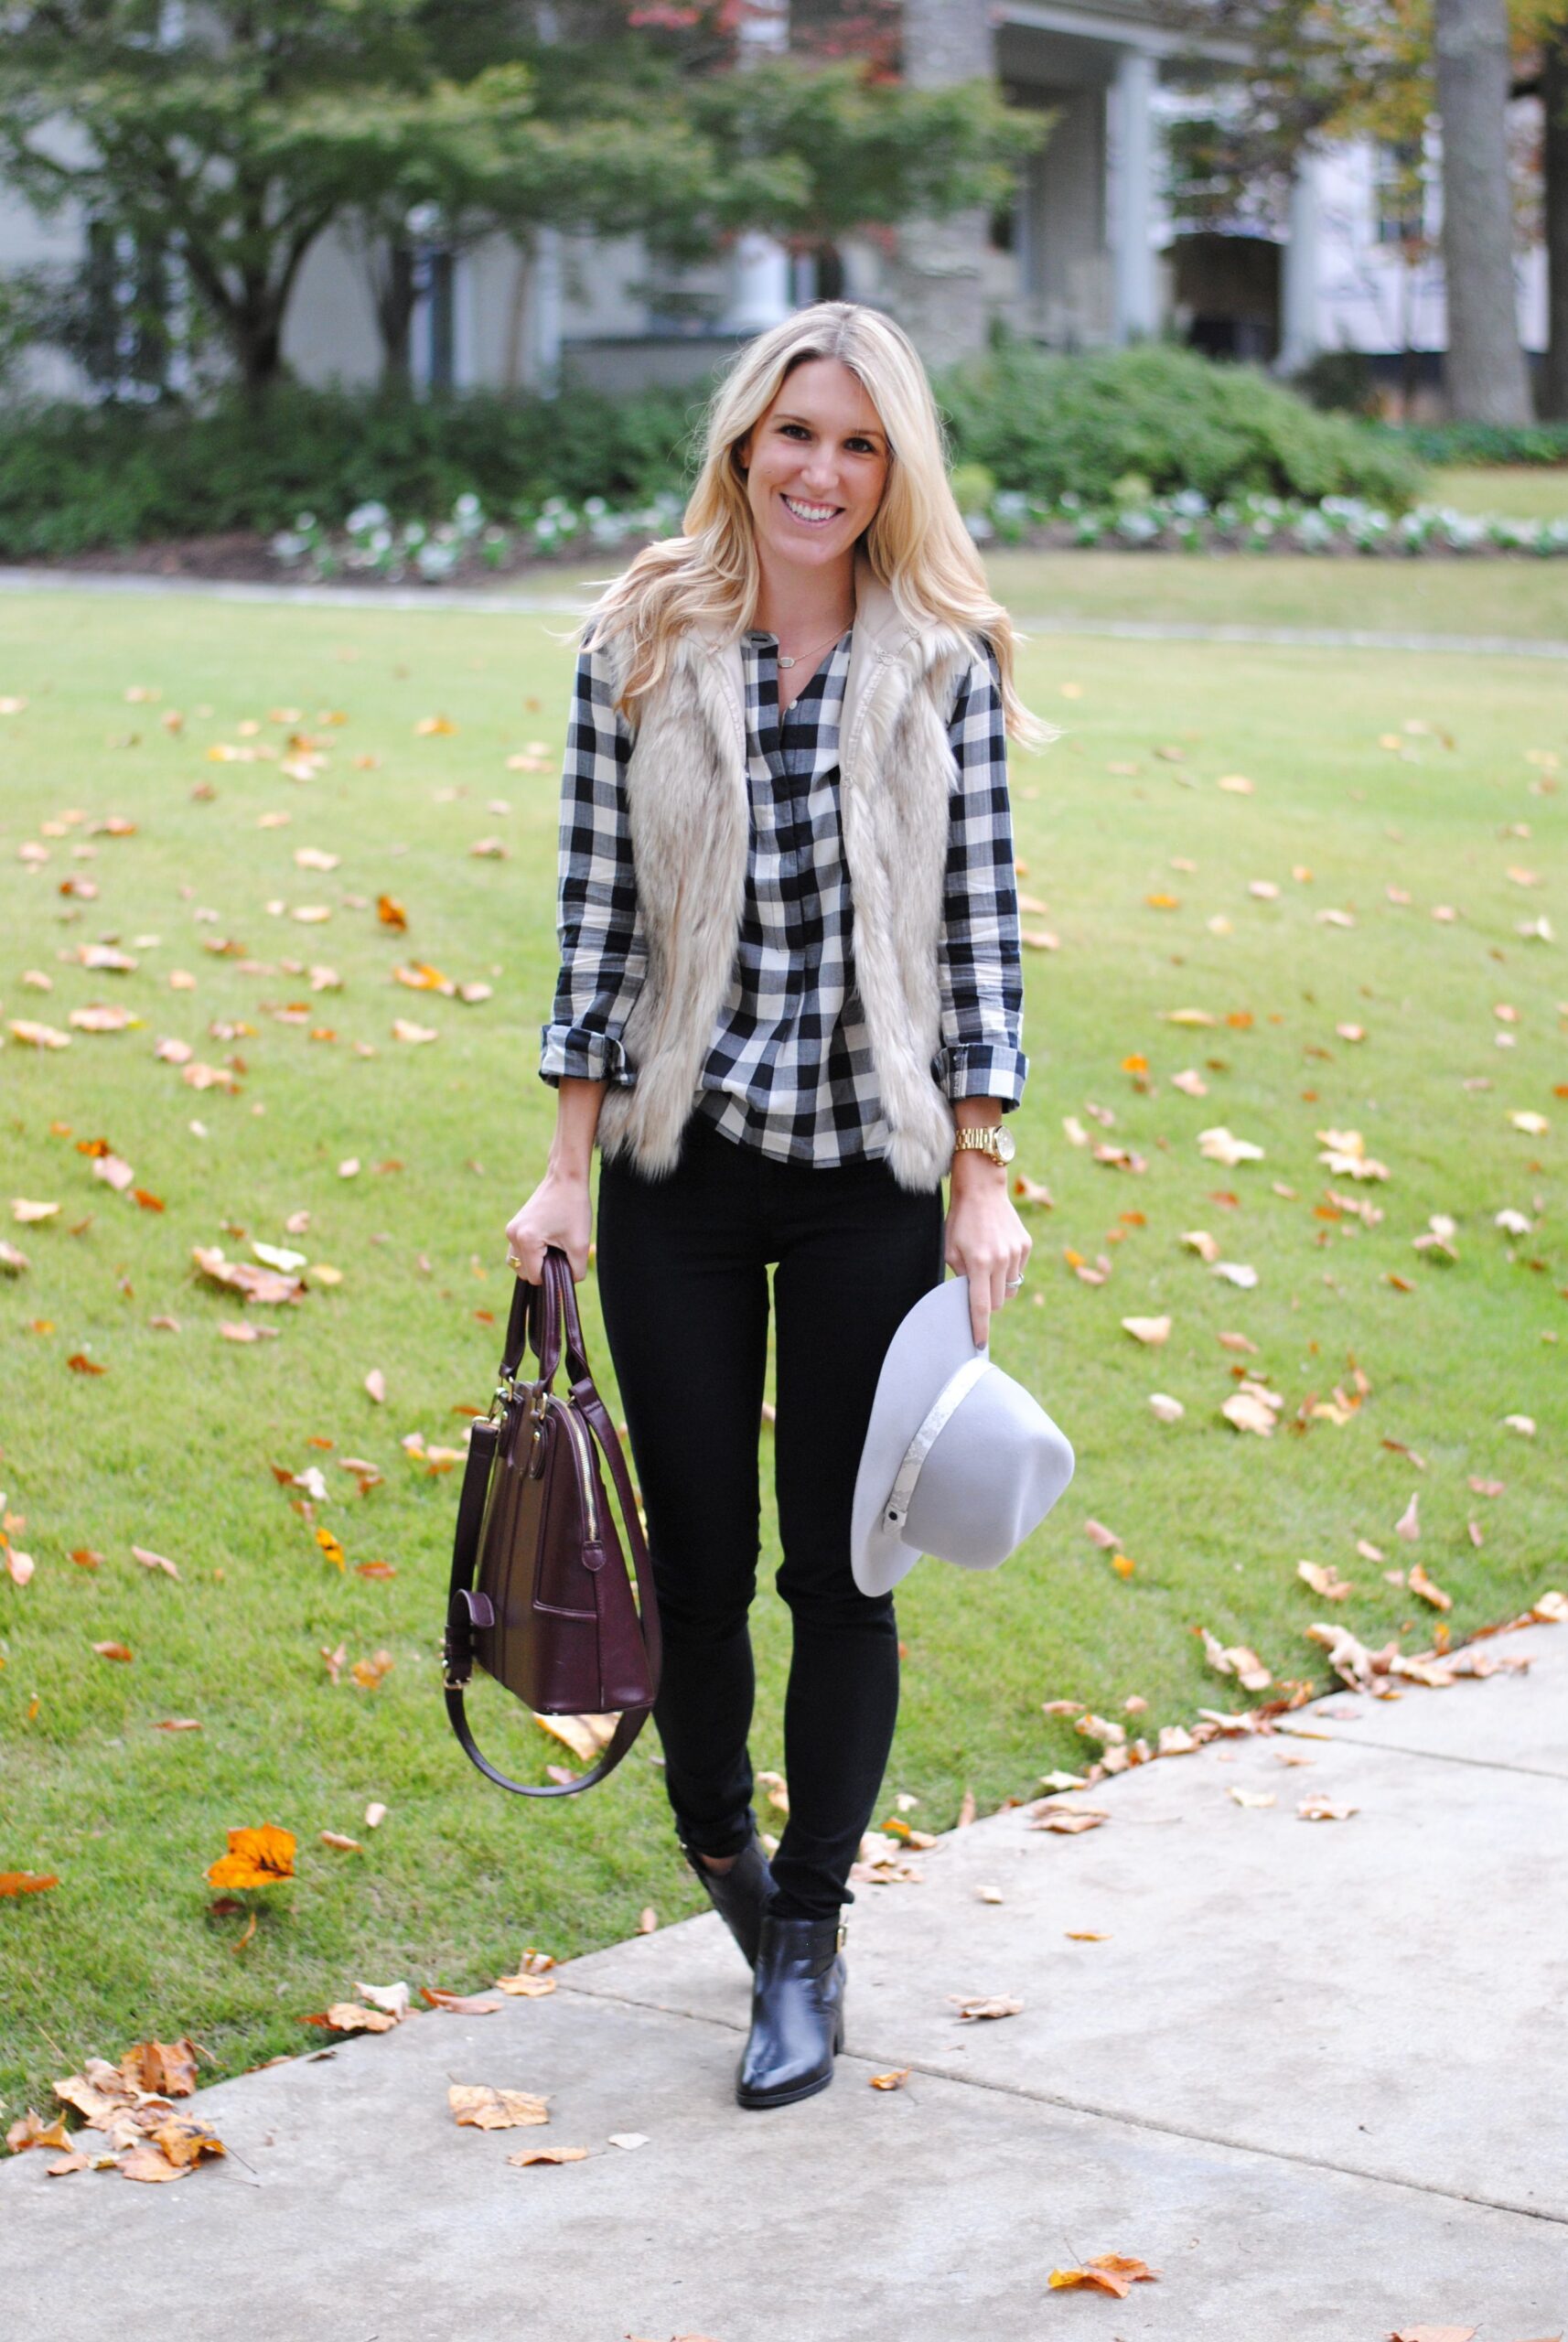 Cozy and Chic: Stylish Fall Outfits featuring Luxe Fur Layers